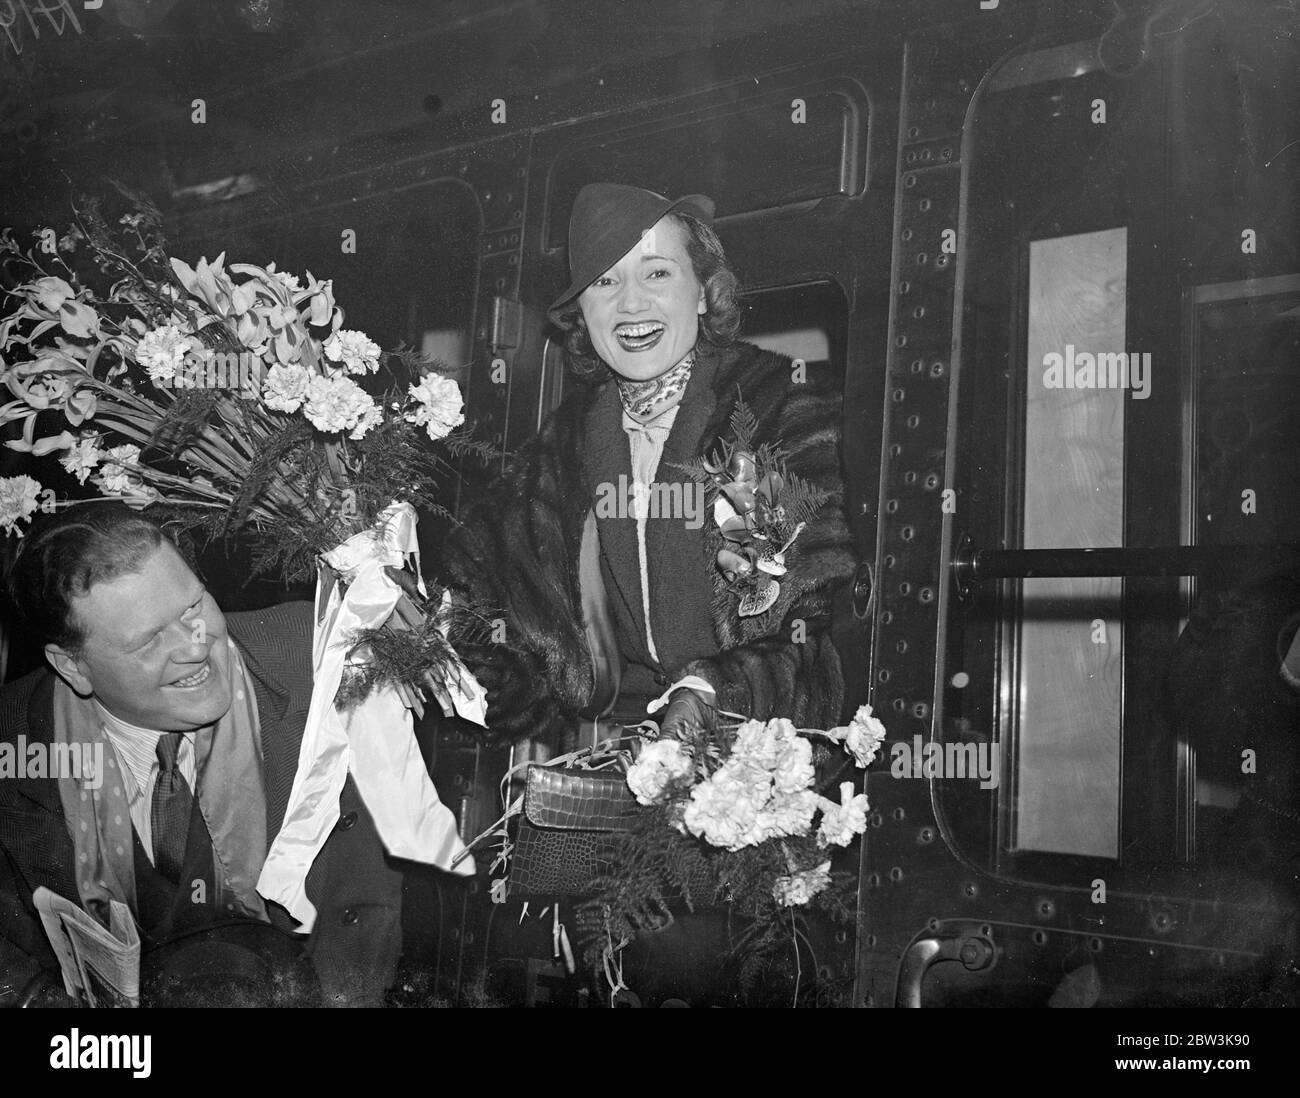 Radio ' Air do well ' leaves for American broadcast tour . Effie Atherton of the radio ' Air do Wells ' party left Waterloo Station , London , on the Lafayette boat train with her husband , Leslie Londau , of fox films for America , where she is to broadcast with Jack Aylton , the band leader . The engagement is a result of a Trans Atlantic telephone talk with Jack Hylton , who is at present in Chicago . Effie Atherton is well known over the Empire broadcasting system . Photo shows , effie ATherton photographed at Waterloo . 8 January 1936 Stock Photo